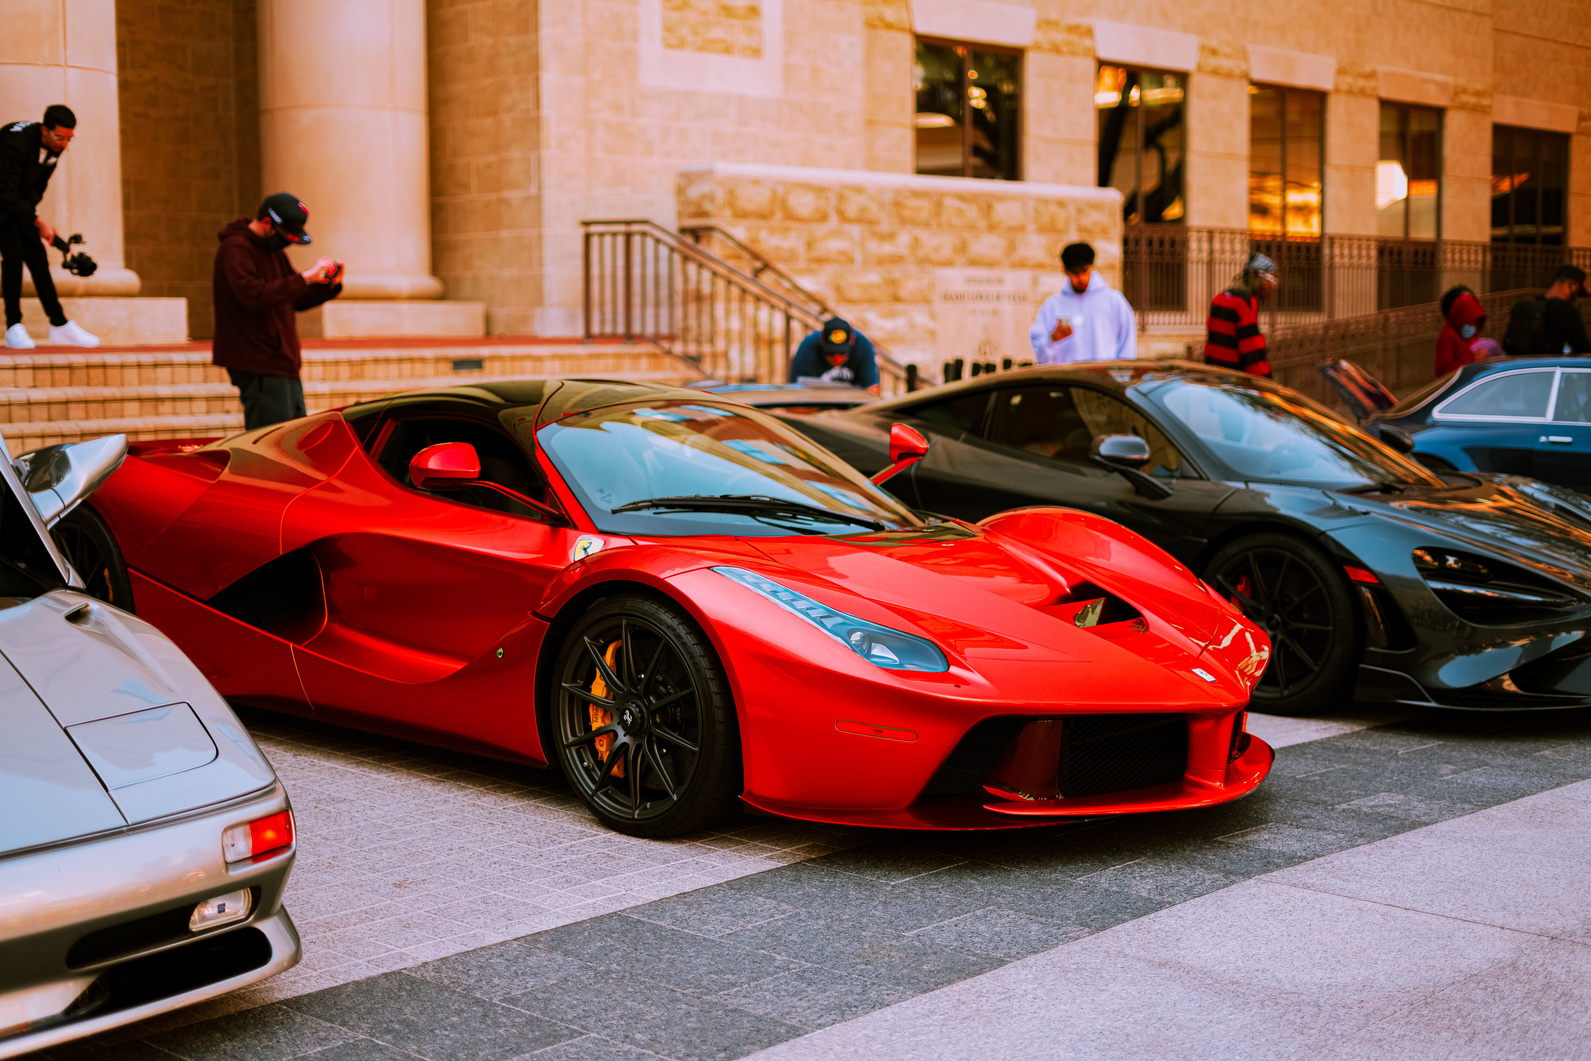 Luxury Cars Parked on the Road